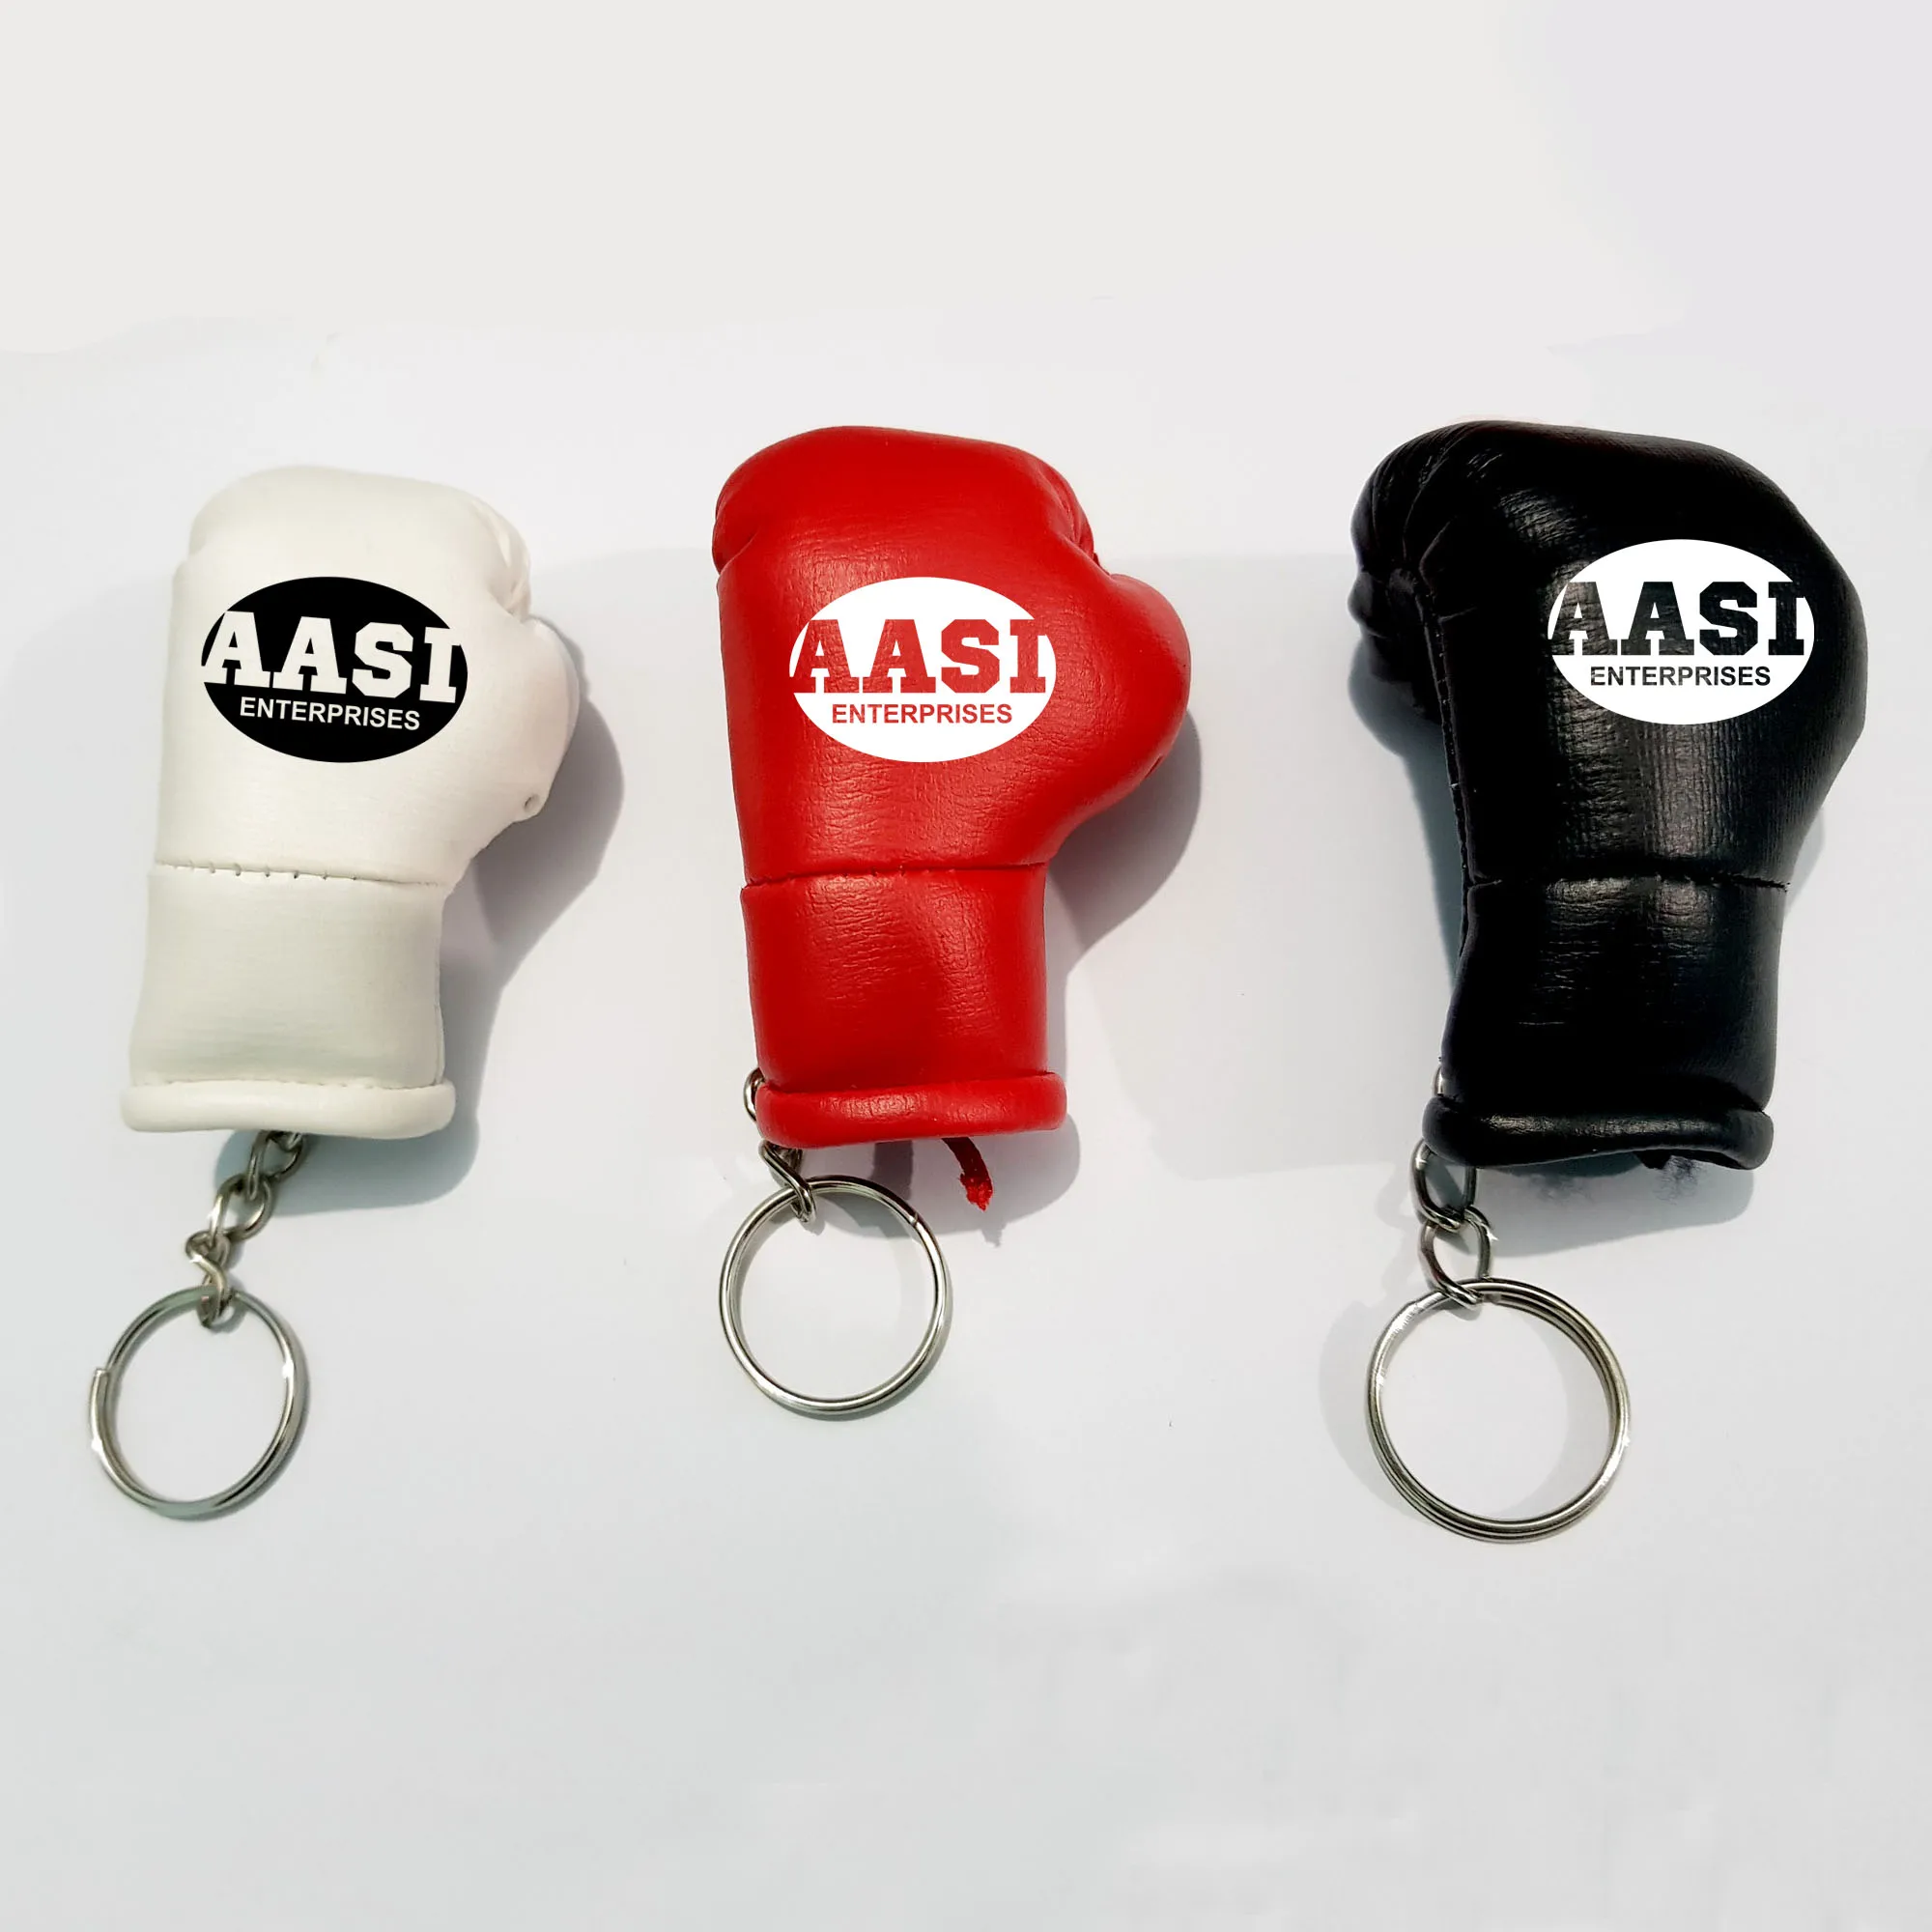 NISSAN KEY CHAIN MINI BOXING GLOVES FOR YOUR KEYS 